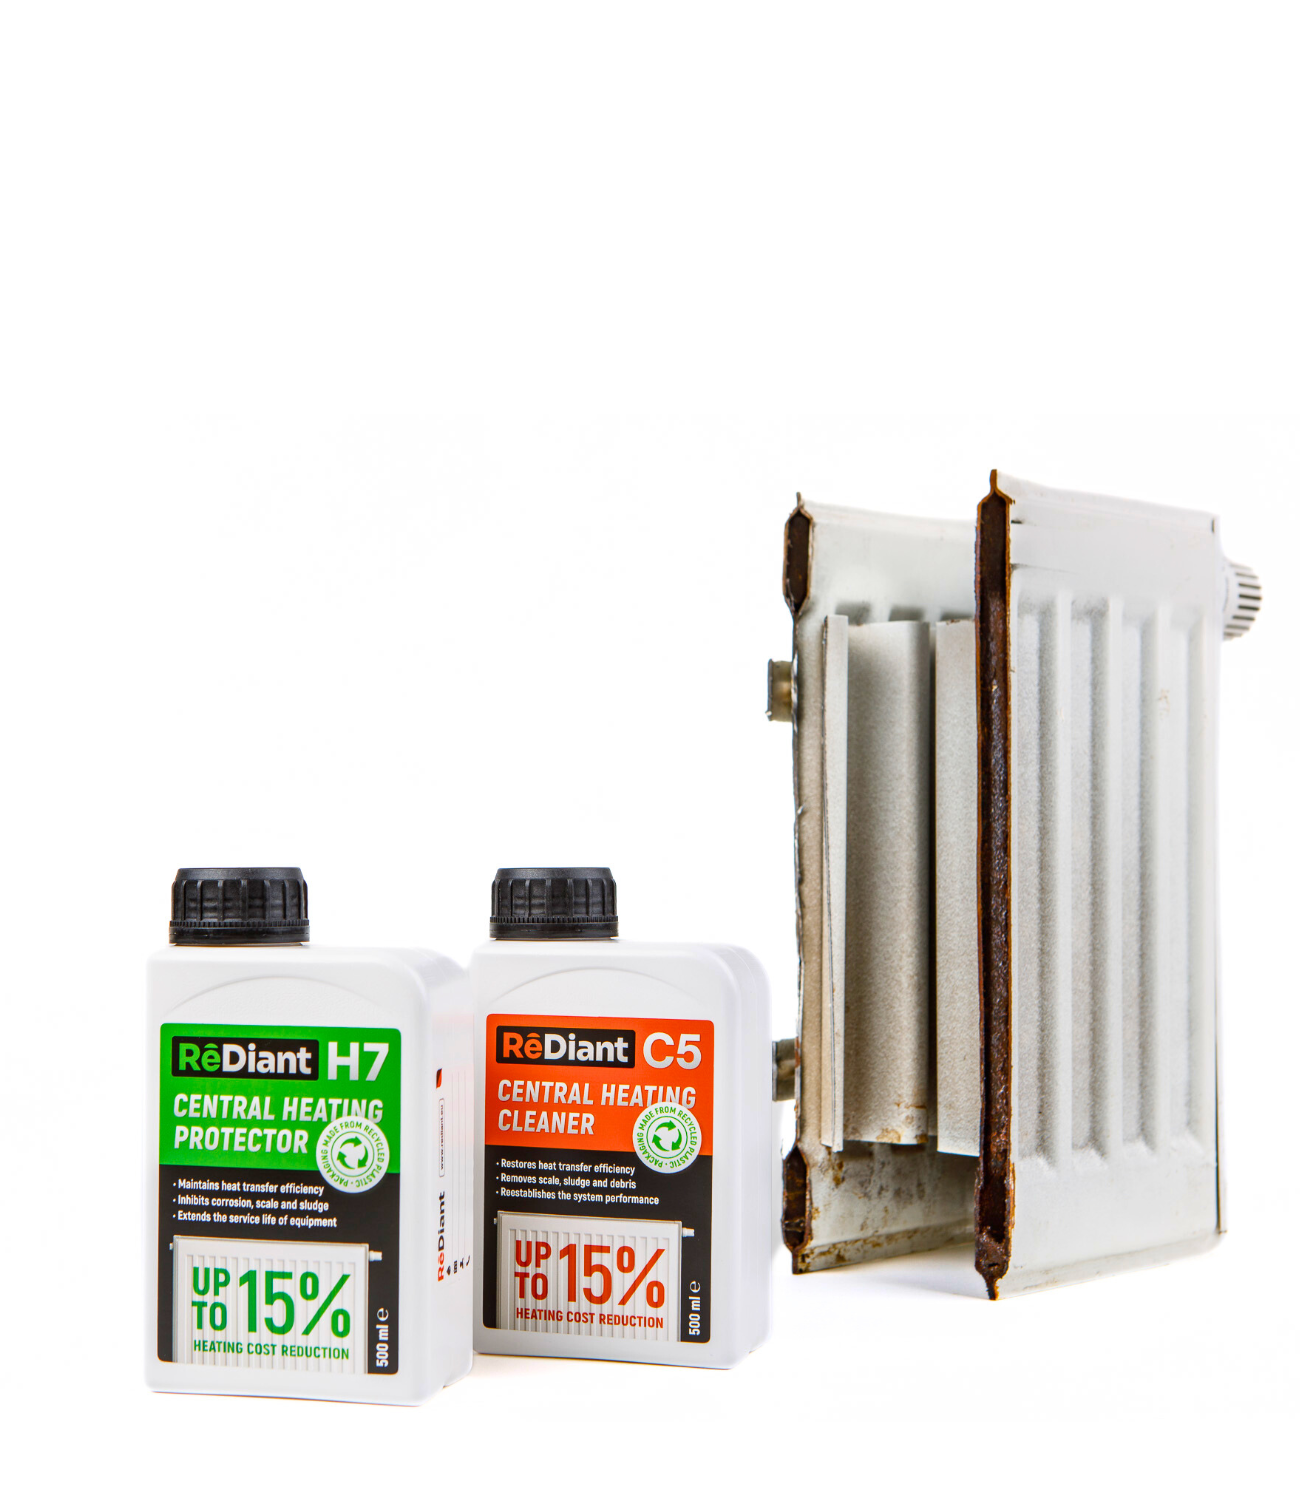 cleaner and corrosion inhibitor with a piece of radiator